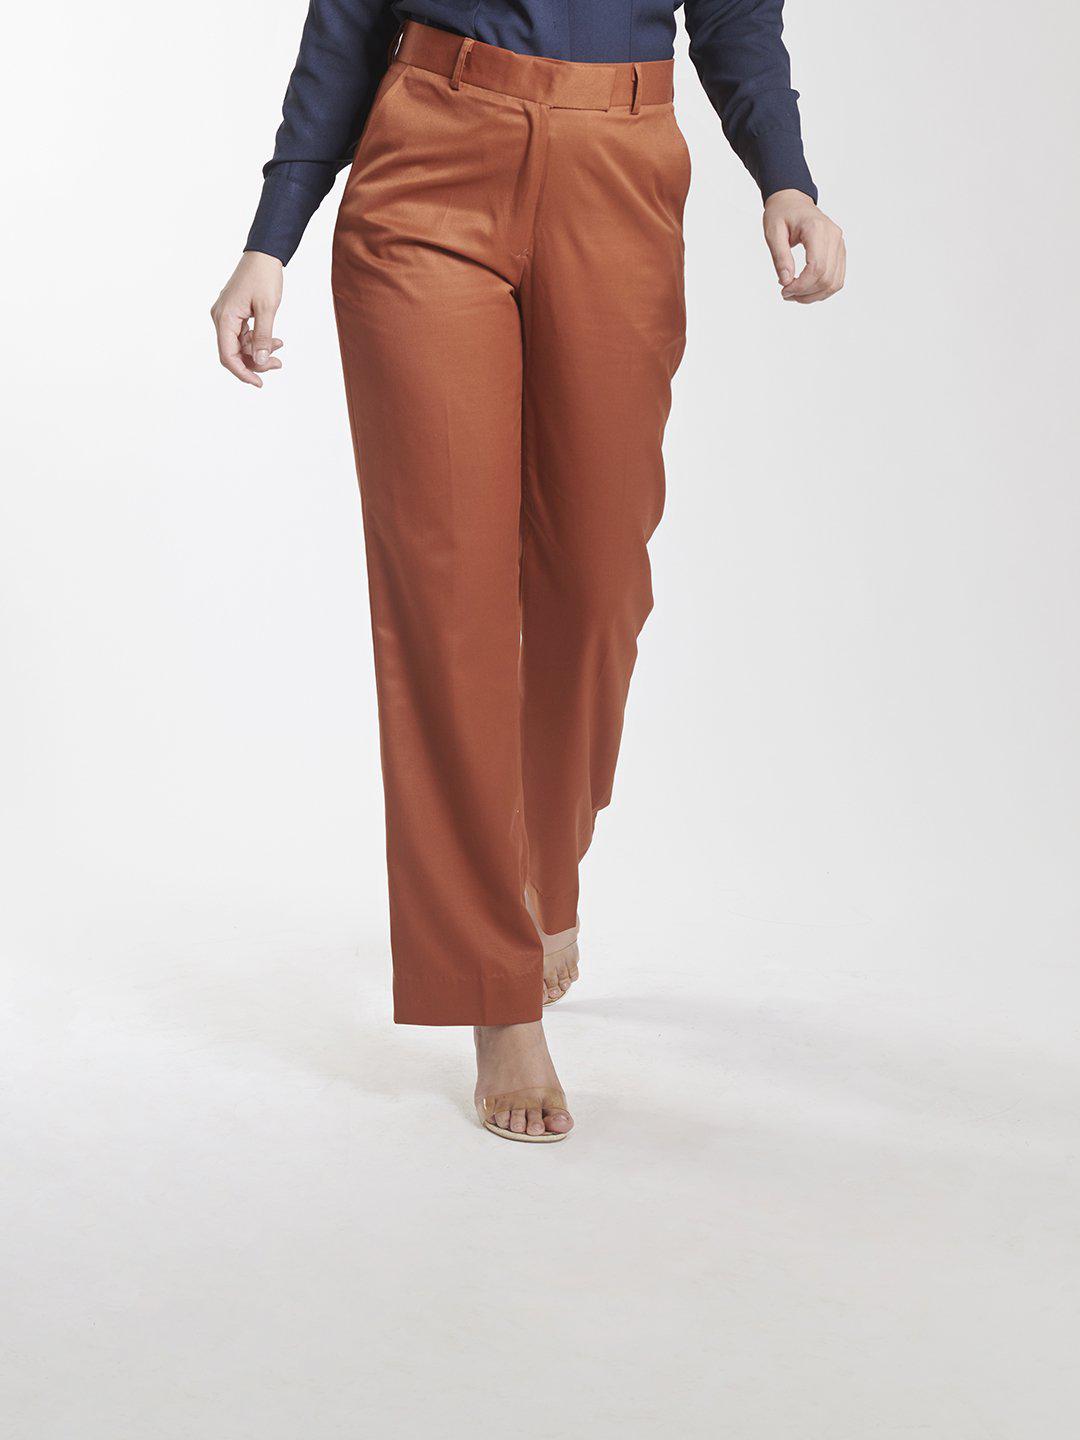 Plain Trousers Ladies Trouser, Model Name/Number: CAIRA05 at Rs 270/piece  in Surat